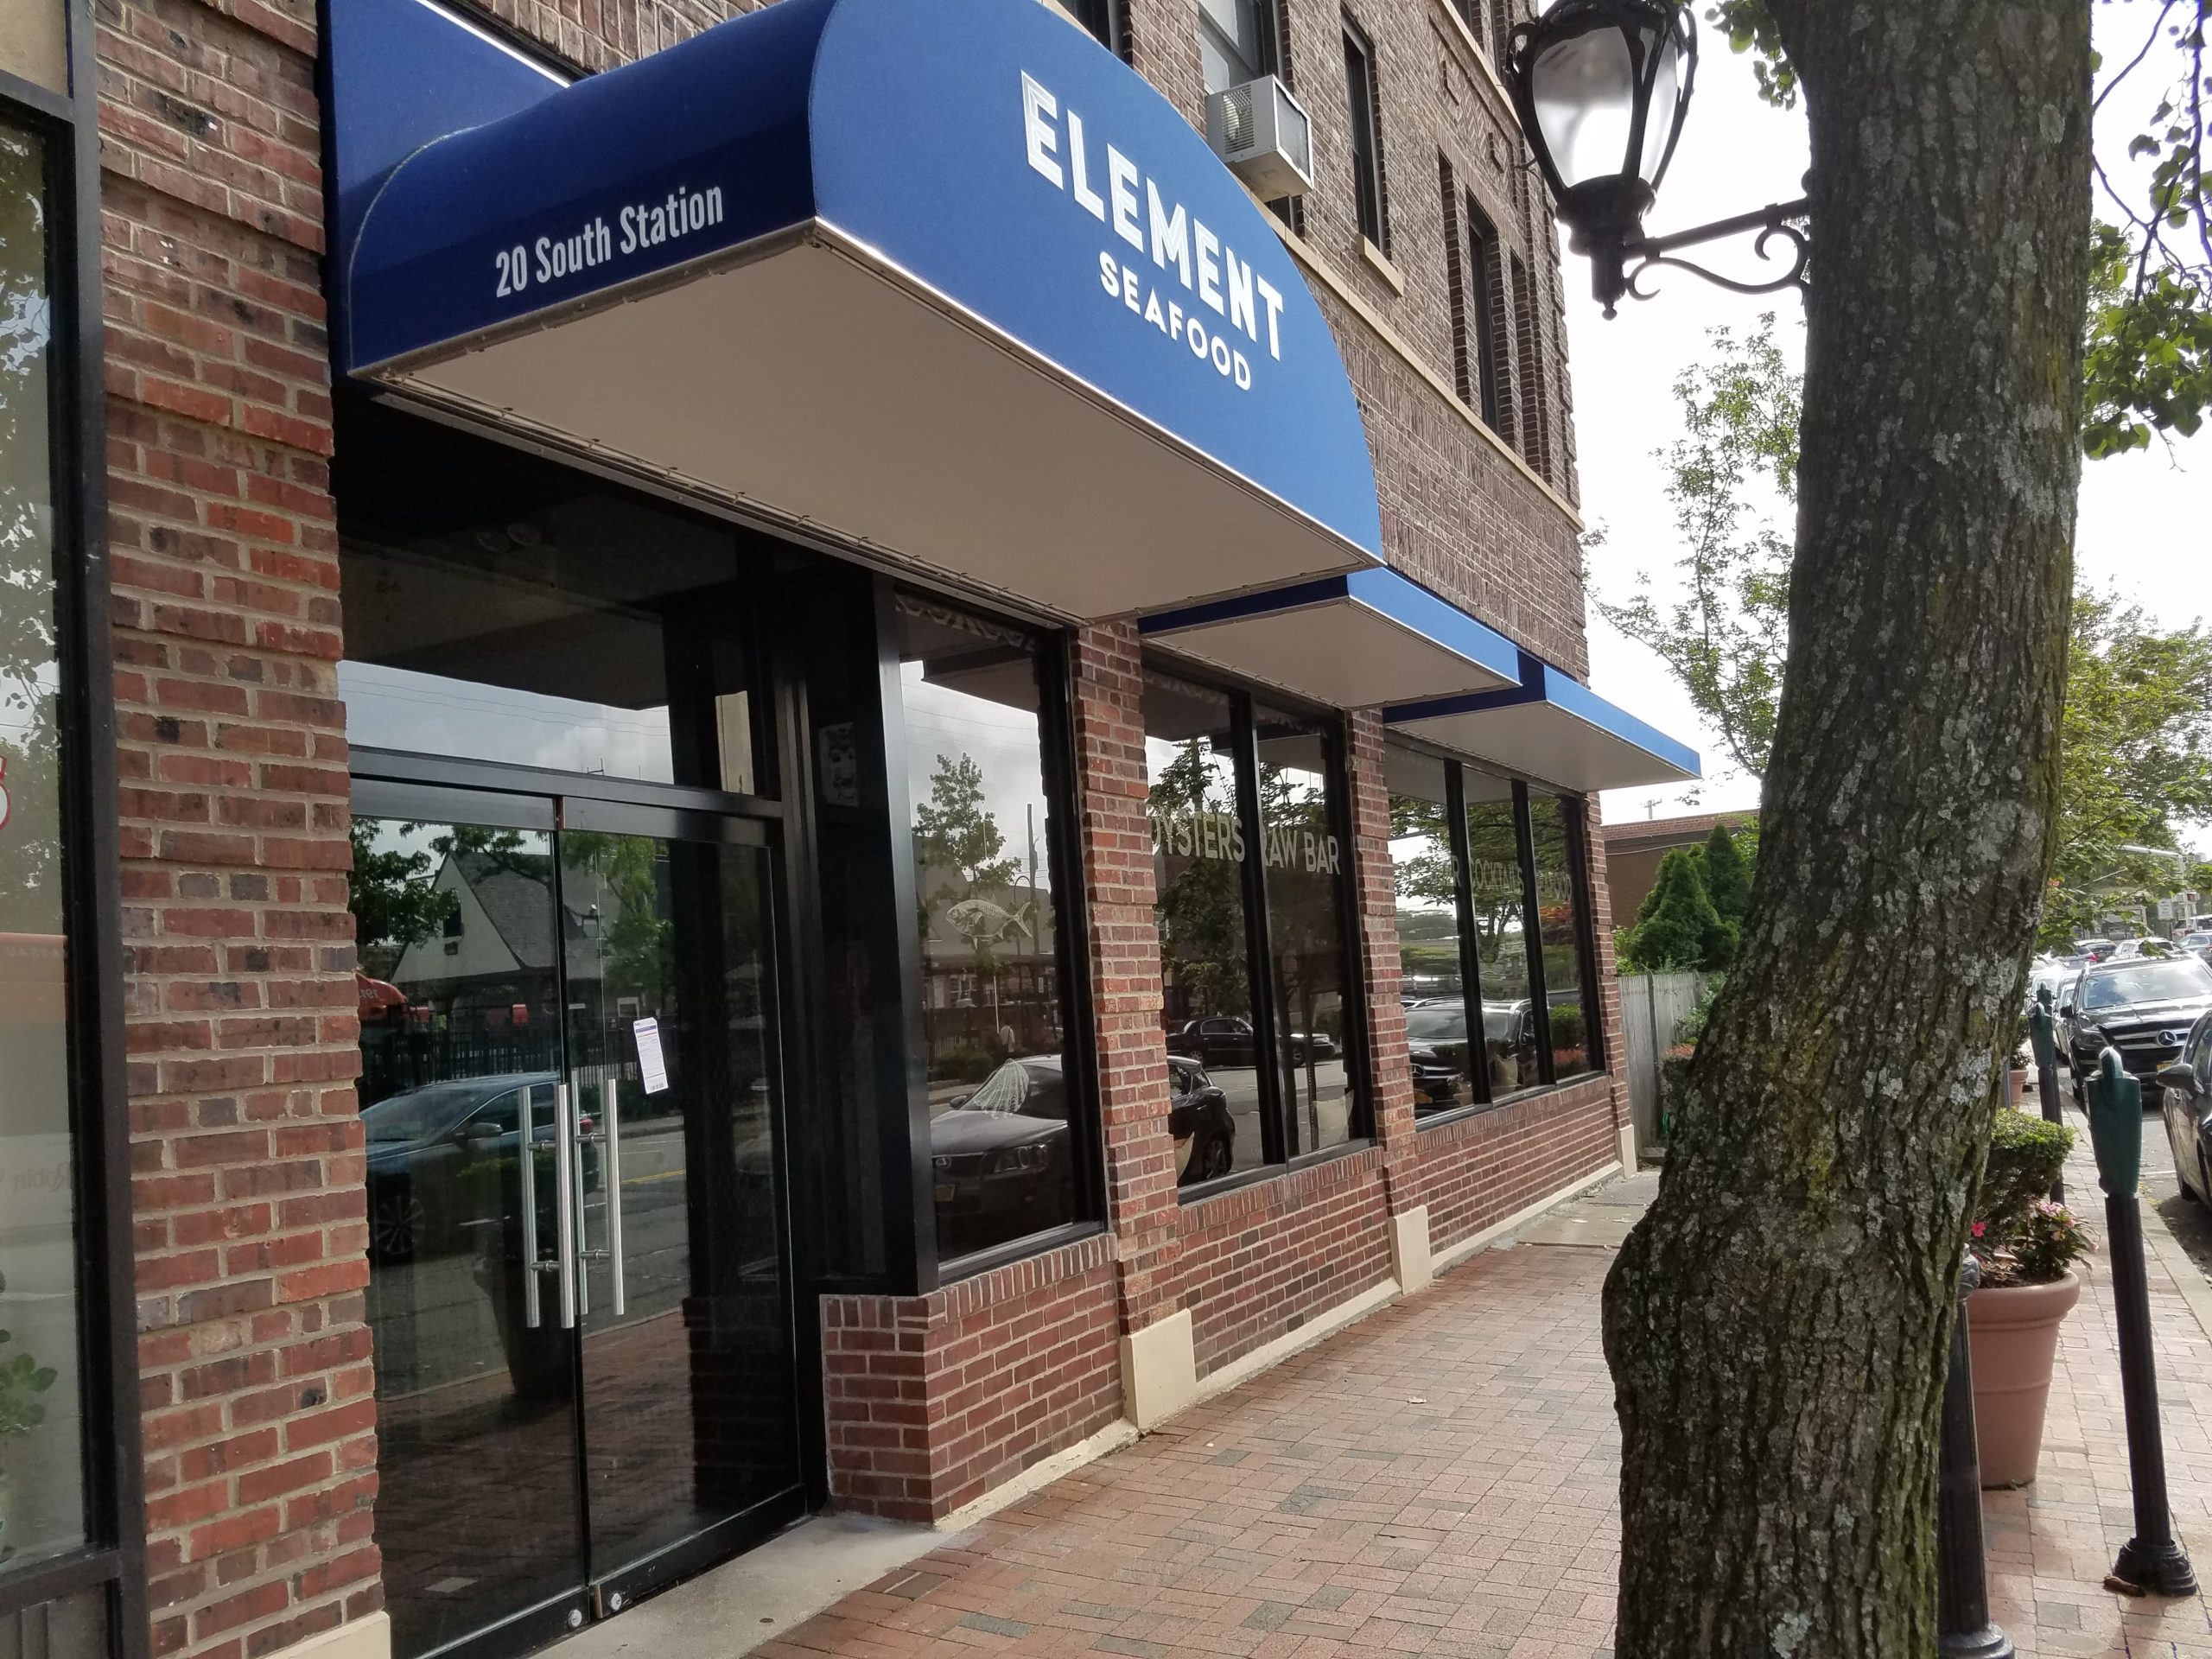 Element Seafood in Great Neck Plaza is no more. (Photo by Janelle Clausen)